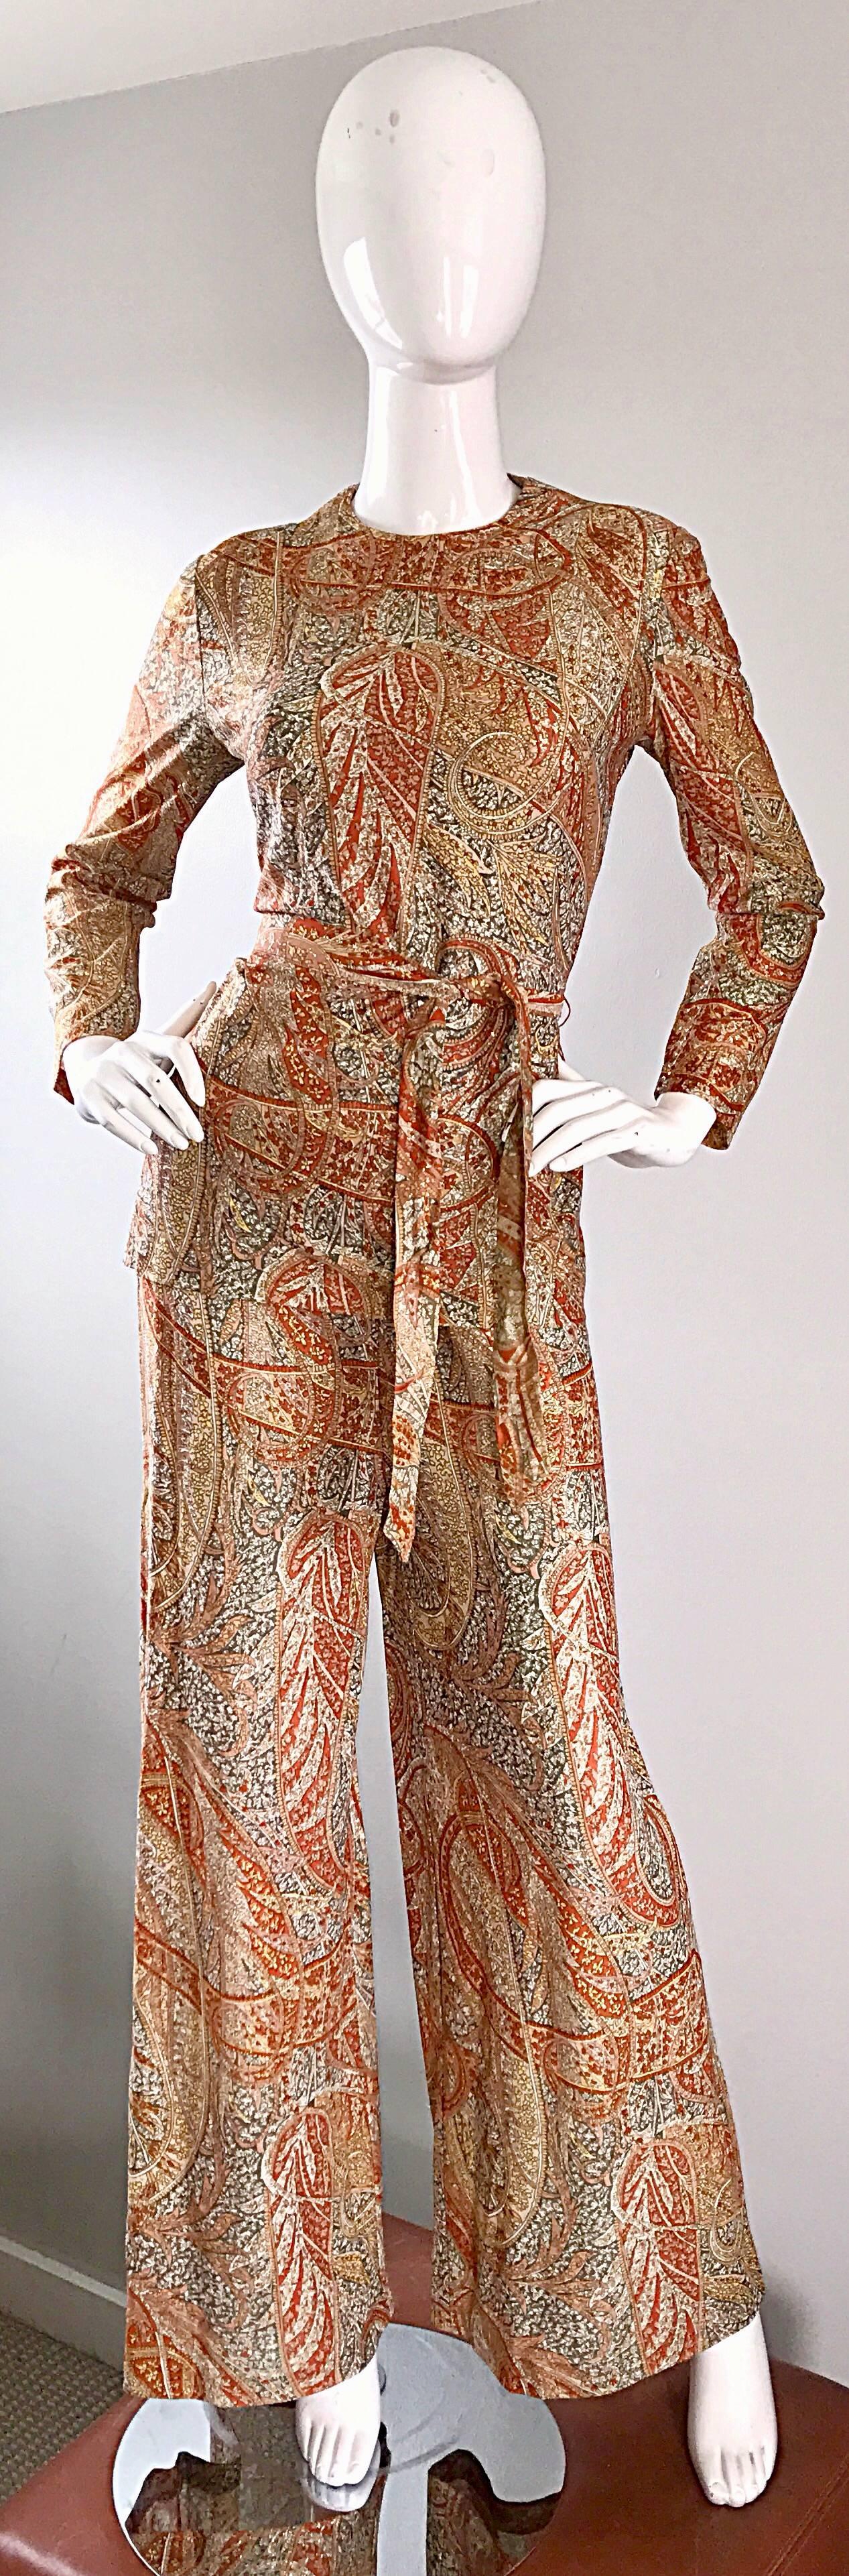 Amazing three piece metallic lurex blend paisley ensemble, including a tunic, belt and wide leg bell bottoms! Features warm tones of brown, burnt orange, tan and gold. Sash belt is detachable from the top. Half zipper up the back of the tunic.